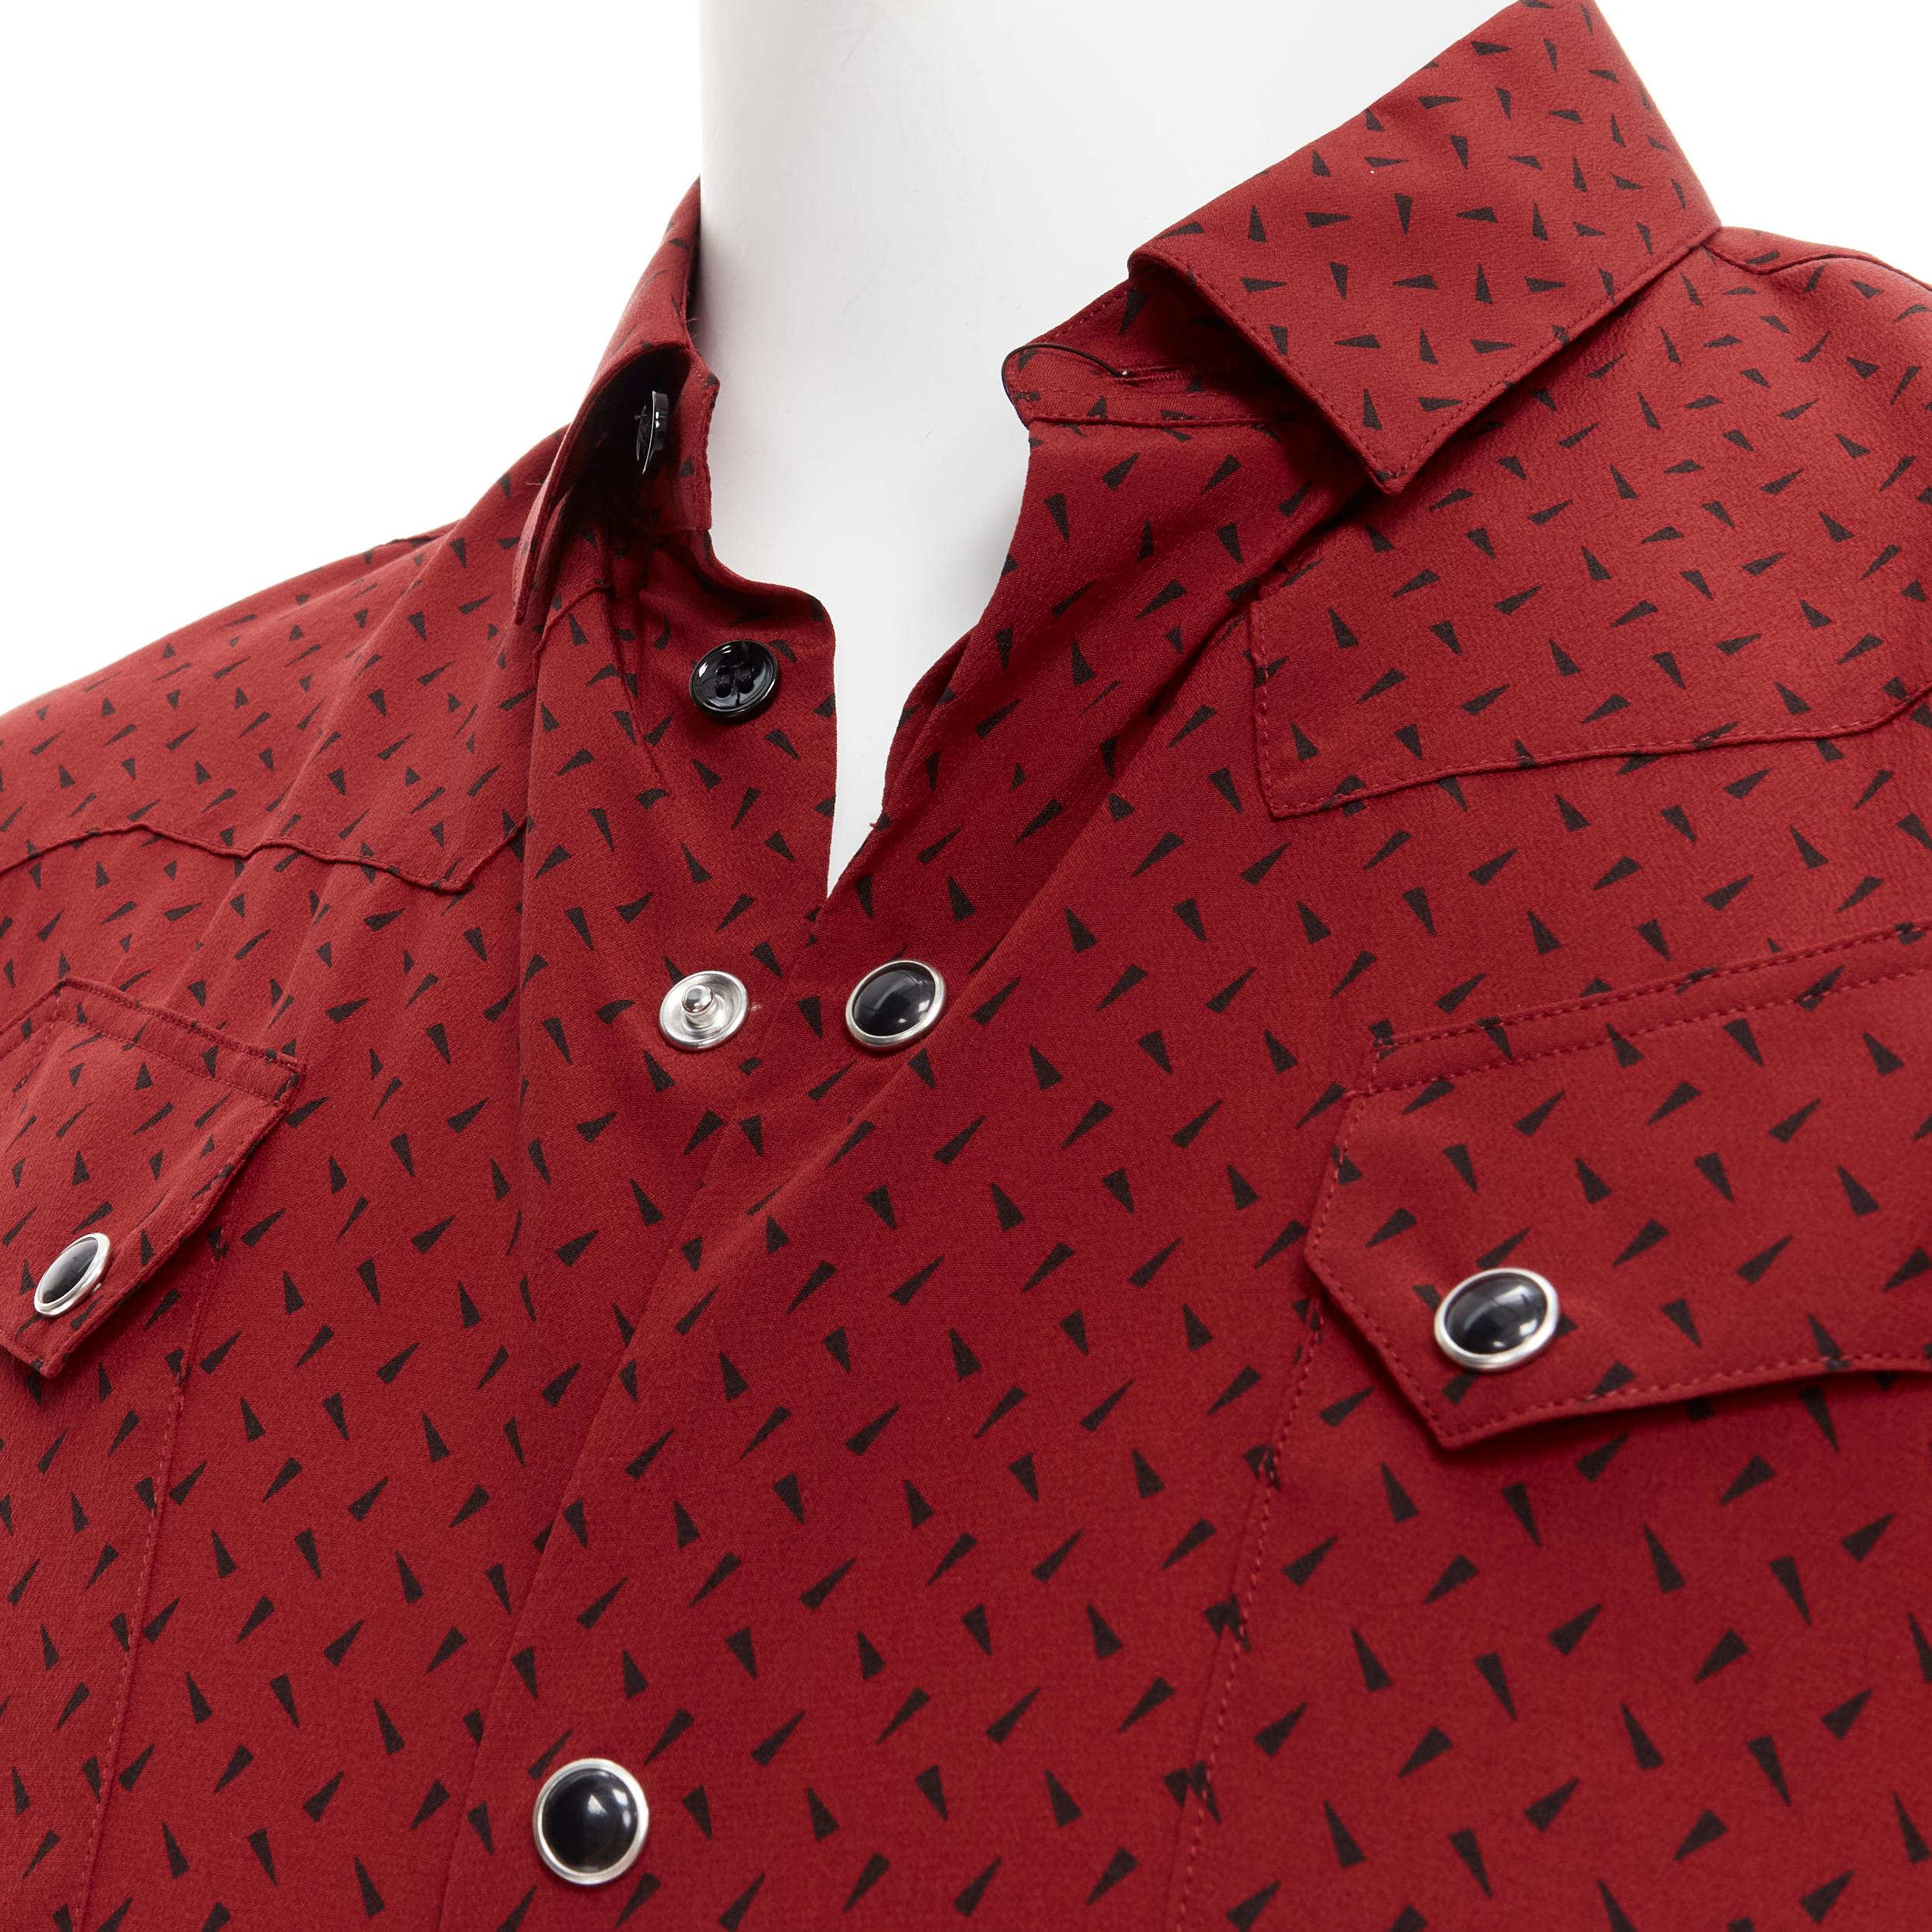 new SAINT LAURENT 2018 100% silk red black print western casual shirt EU38 S 
Reference: TGAS/B01736 
Brand: Saint Laurent 
Designer: Anthony Vaccarello 
Collection: 2018 
Material: Silk 
Color: Red 
Pattern: Abstract 
Closure: Button 
Extra Detail: